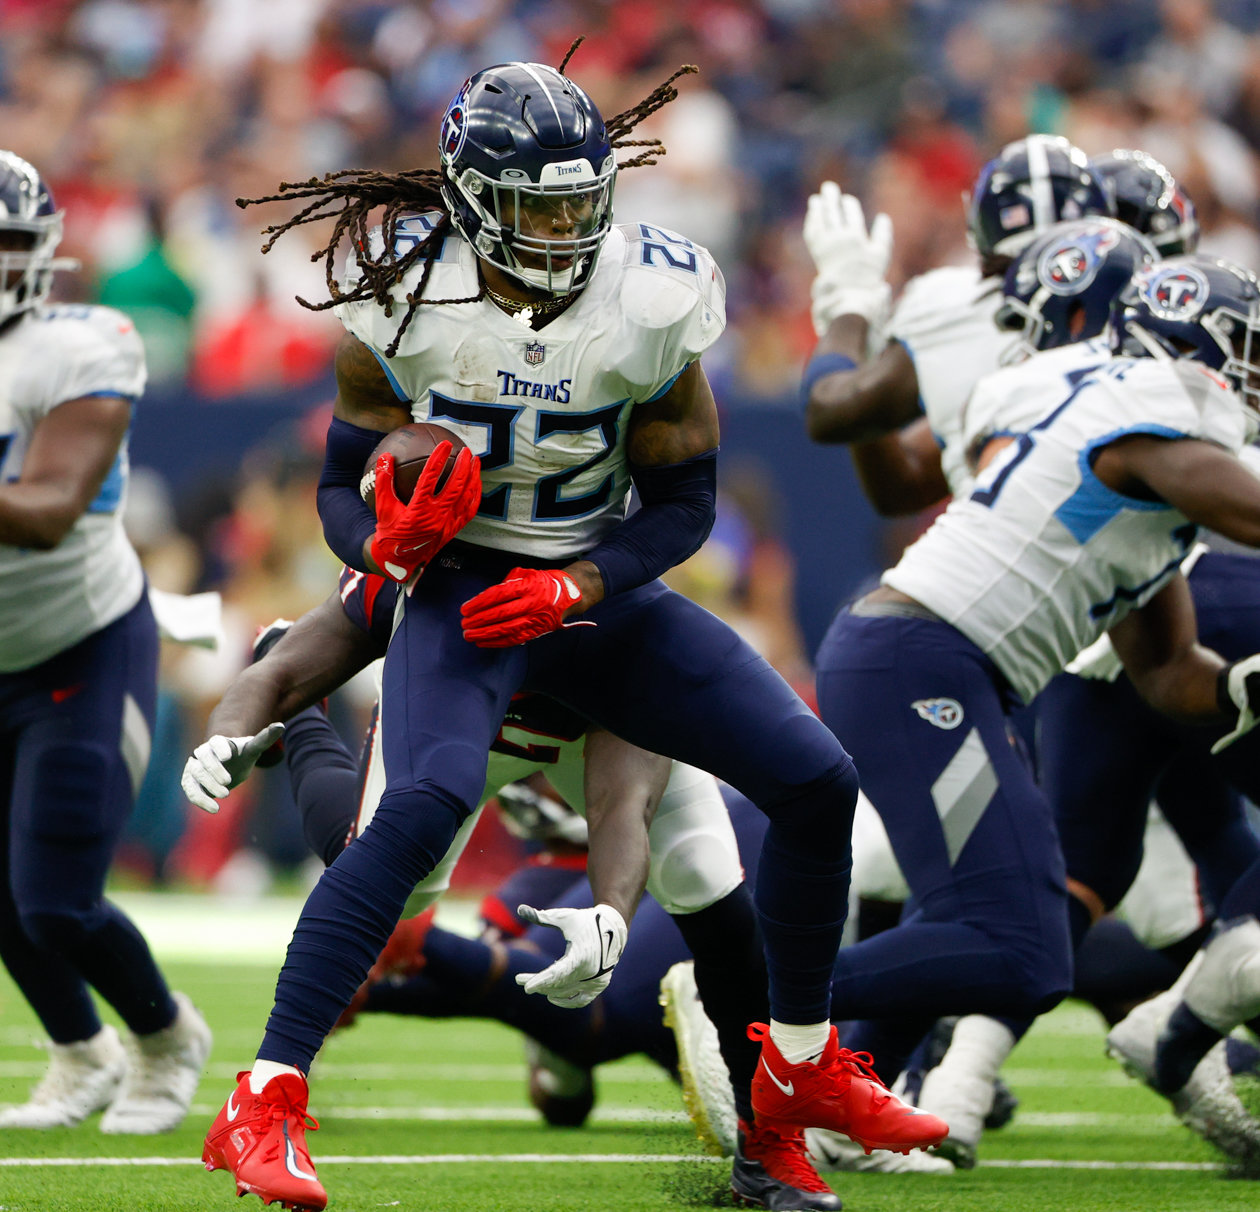 Titans running back Derrick Henry (22) carries the ball during an NFL game between the Texans and the Titans on Oct. 30, 2022 in Houston.